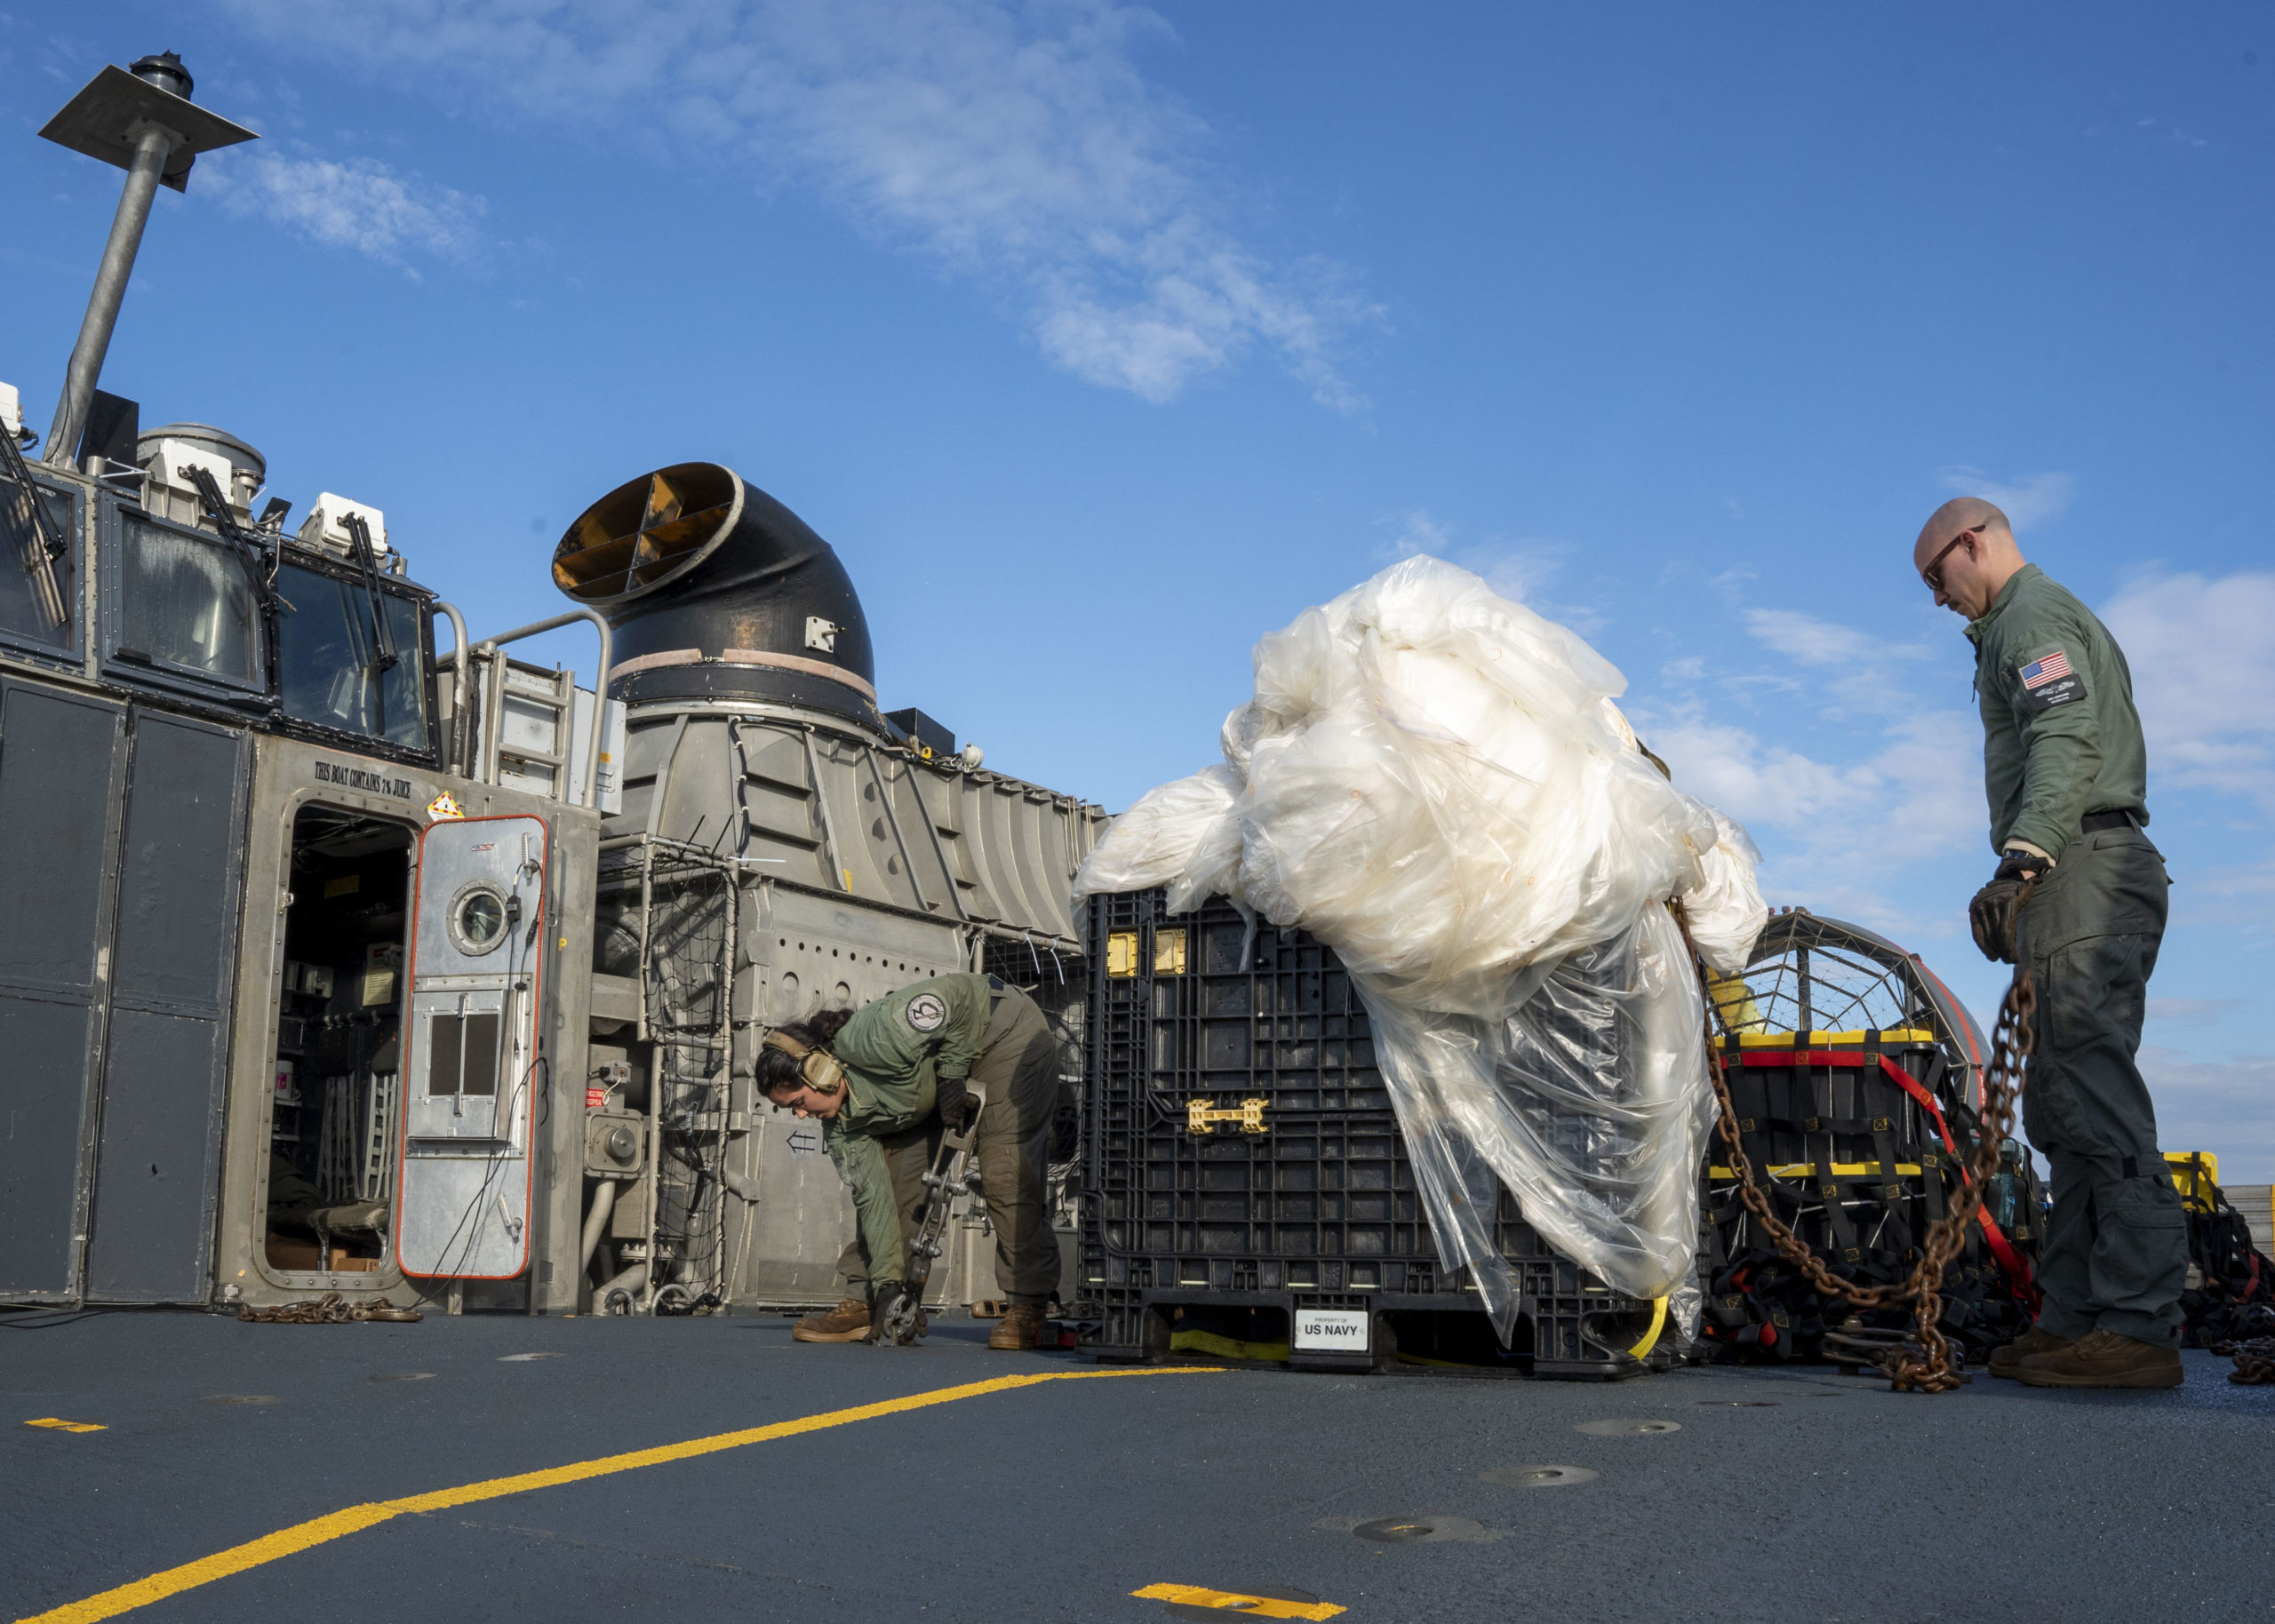 VIRGINIA BEACH, VA - FEBRUARY 10: In this U.S. Navy handout, Sailors assigned to Assault Craft Unit 4 prepare material recovered in the Atlantic Ocean from a high-altitude balloon for transport to federal agents at Joint Expeditionary Base Little Creek Feb. 10, 2023. At the direction of the President of the United States and with the full support of the Government of Canada, U.S. fighter aircraft under U.S. Northern Command authority engaged and brought down a high-altitude balloon within sovereign U.S. airspace and over U.S. territorial waters, Feb.4, 2023. Active duty, reserve, National Guard, and civilian personnel planned and executed the operation, and partners from the U.S. Coast Guard, Federal Aviation Administration, Federal Bureau of Investigation, and Naval Criminal Investigative Service (NCIS) ensured public safety throughout the operation and recovery efforts. 